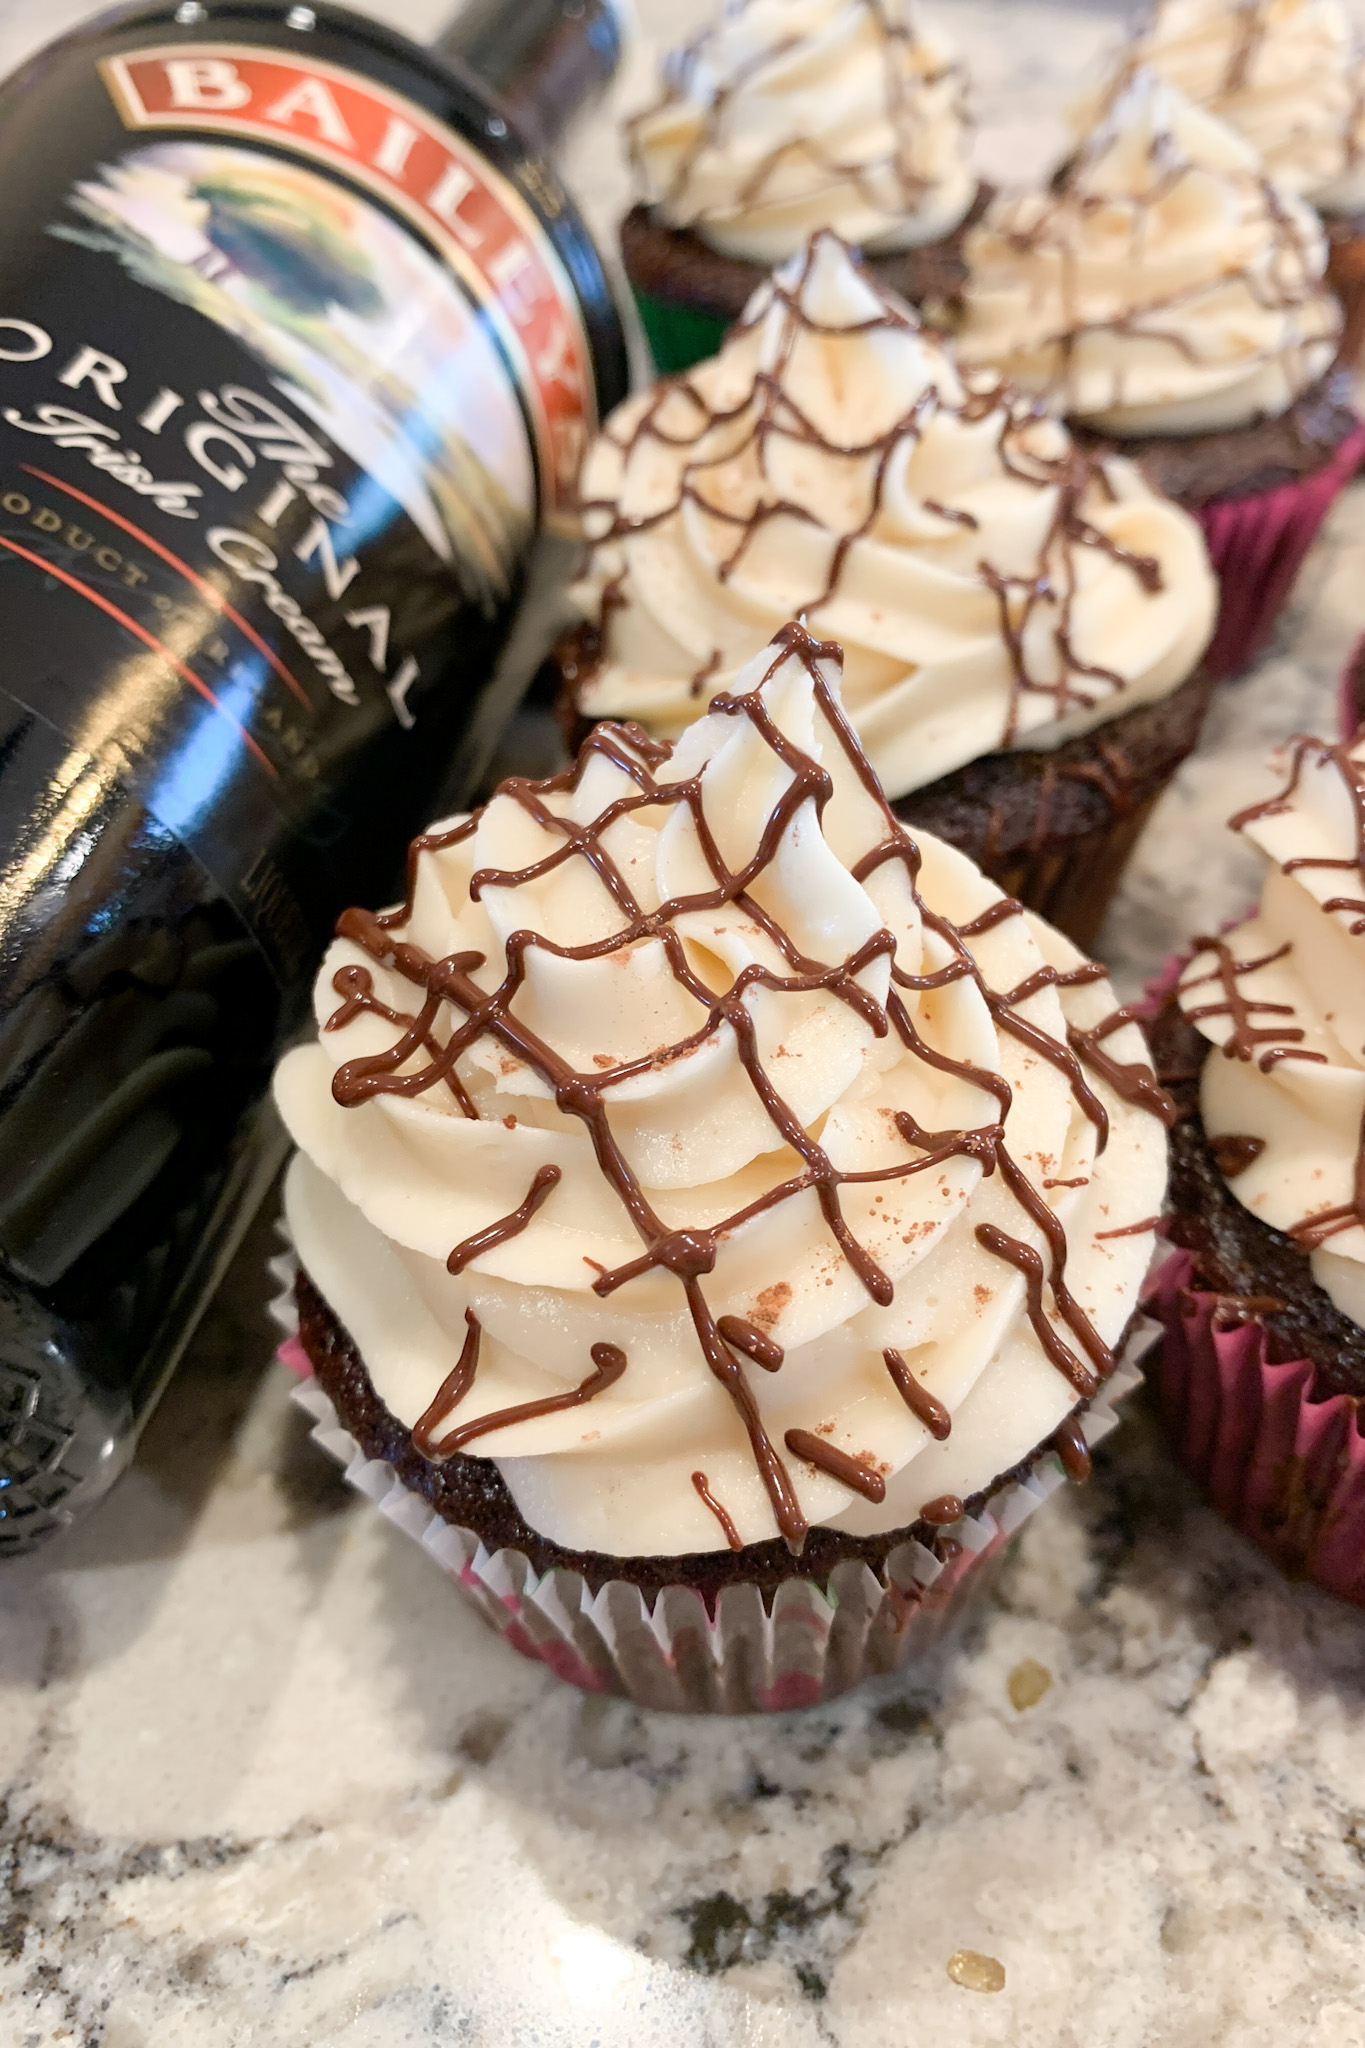 Chocolate Cupcakes with Baileys Irish Cream Frosting - The Big Booty Baker